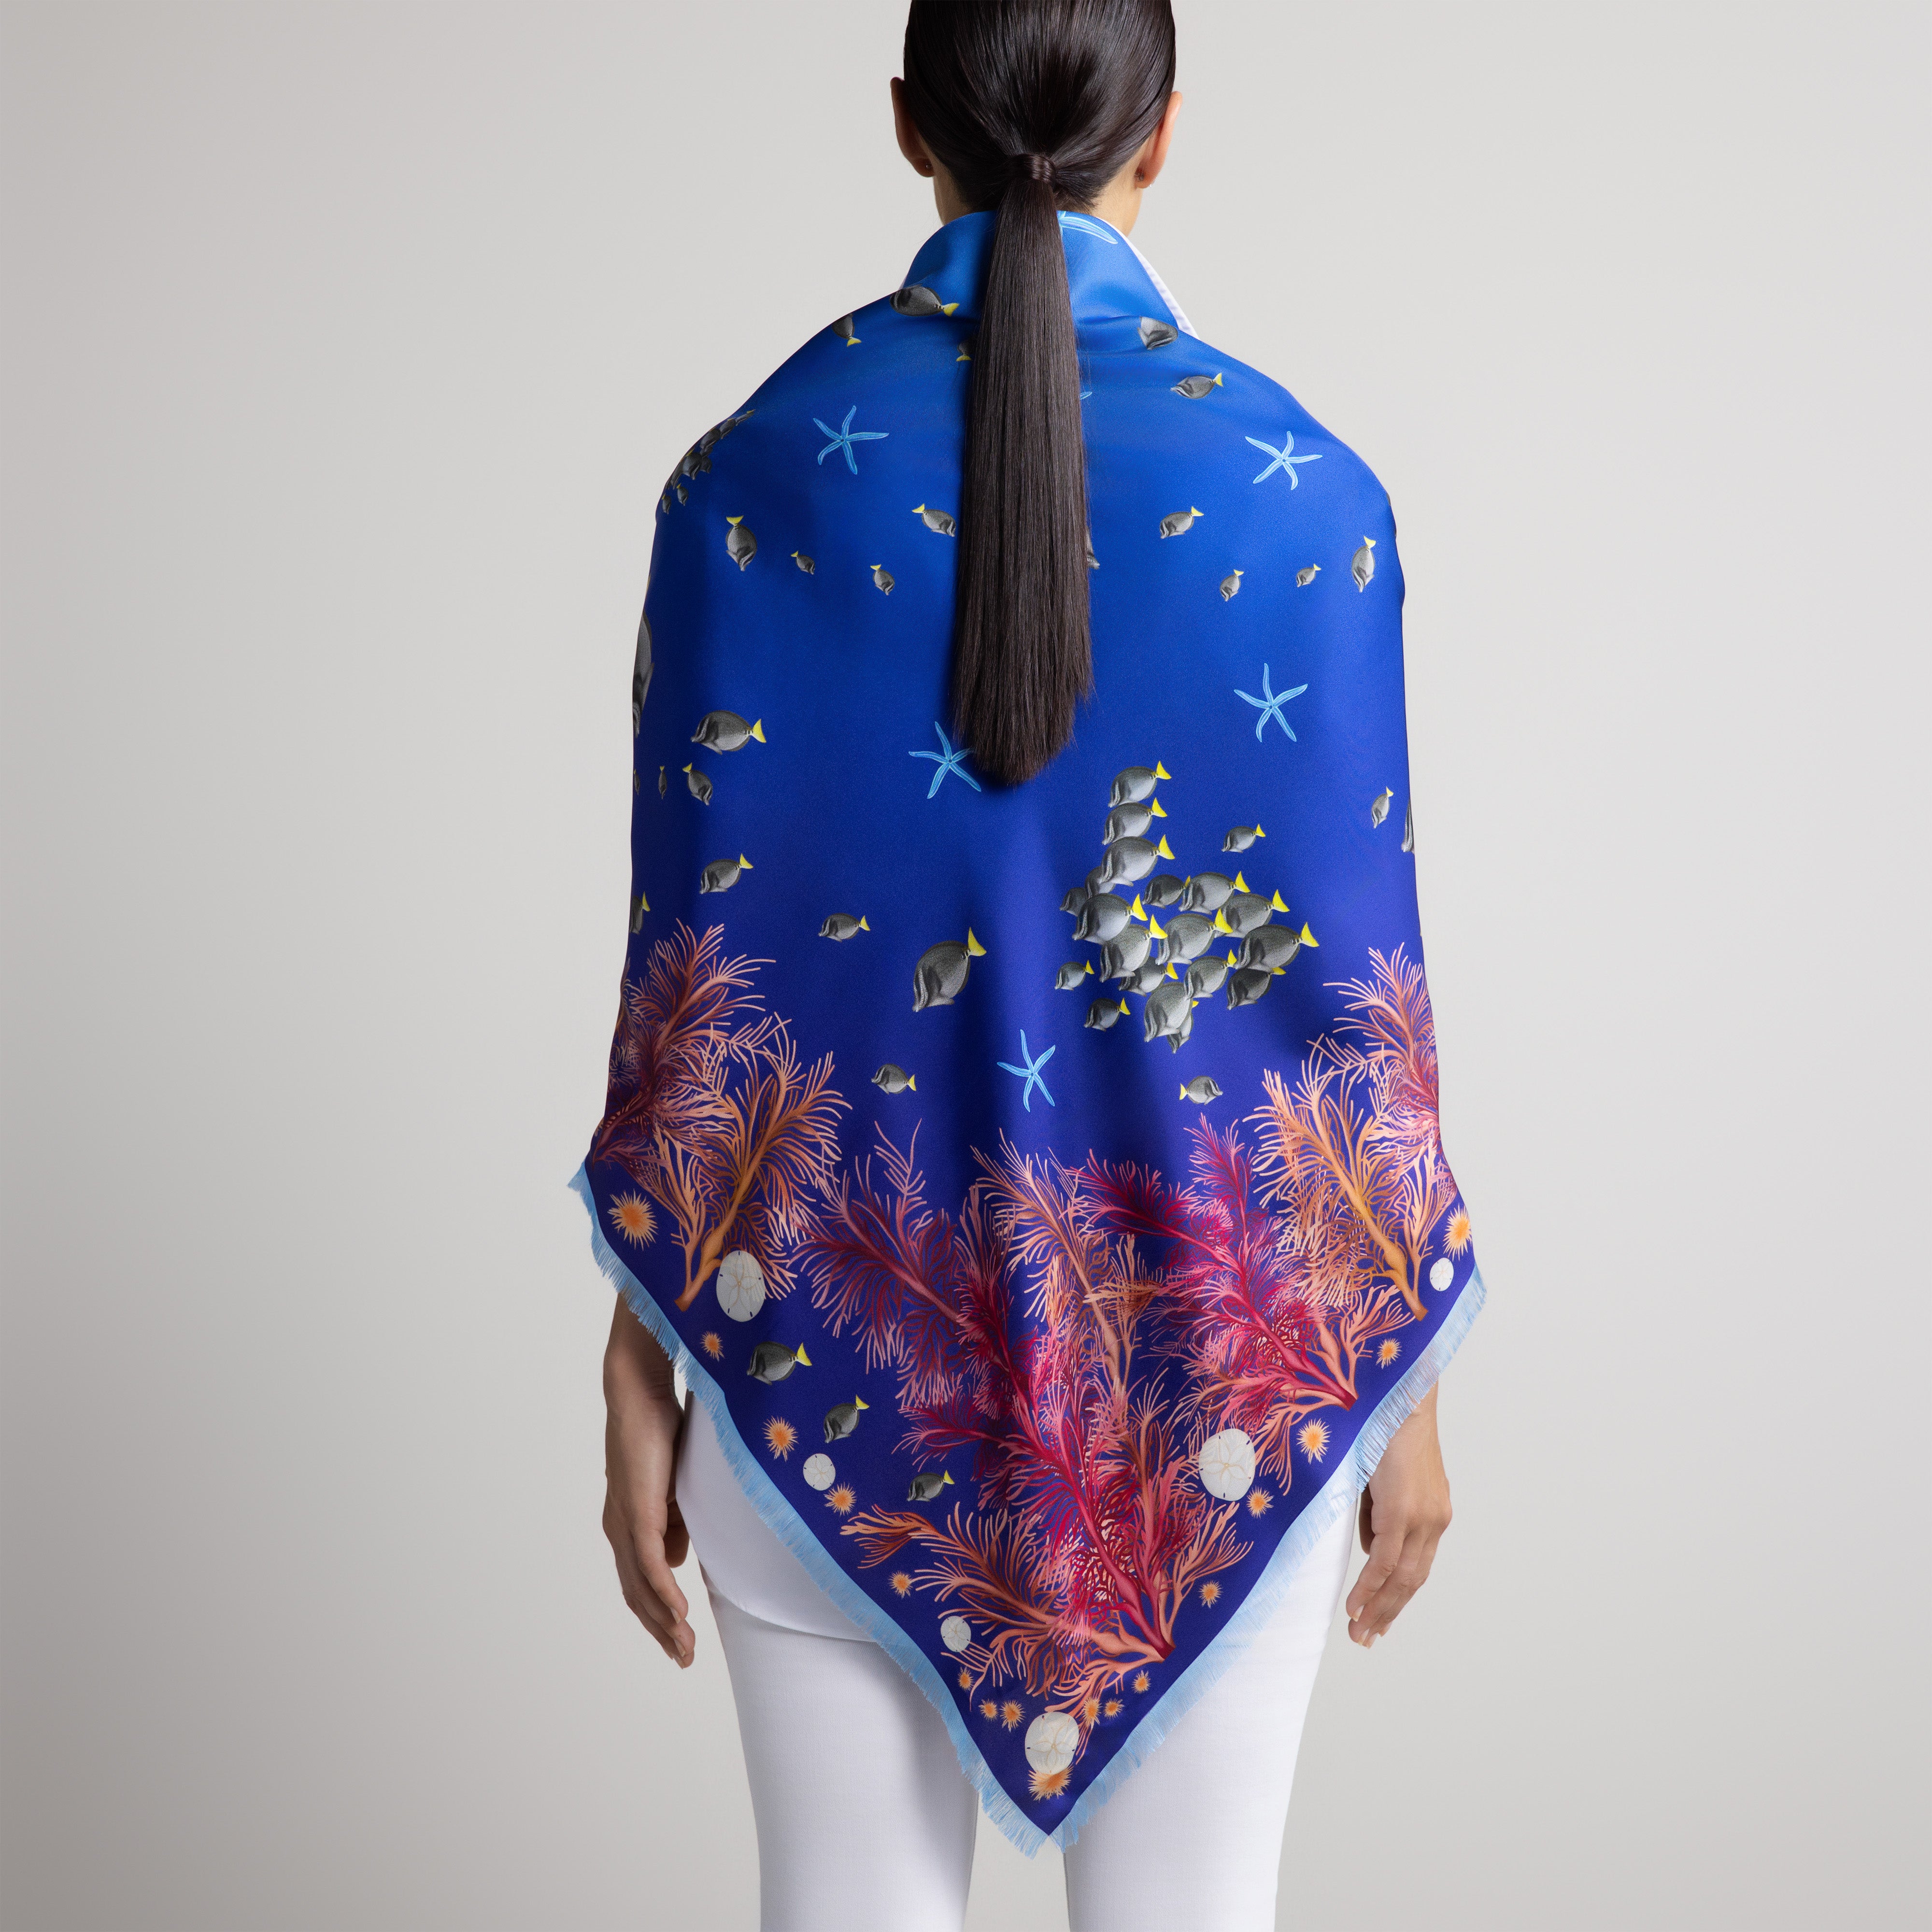 Galapagos Grande Silk Scarf in Blue Ombré with Hand-Feathered Edges